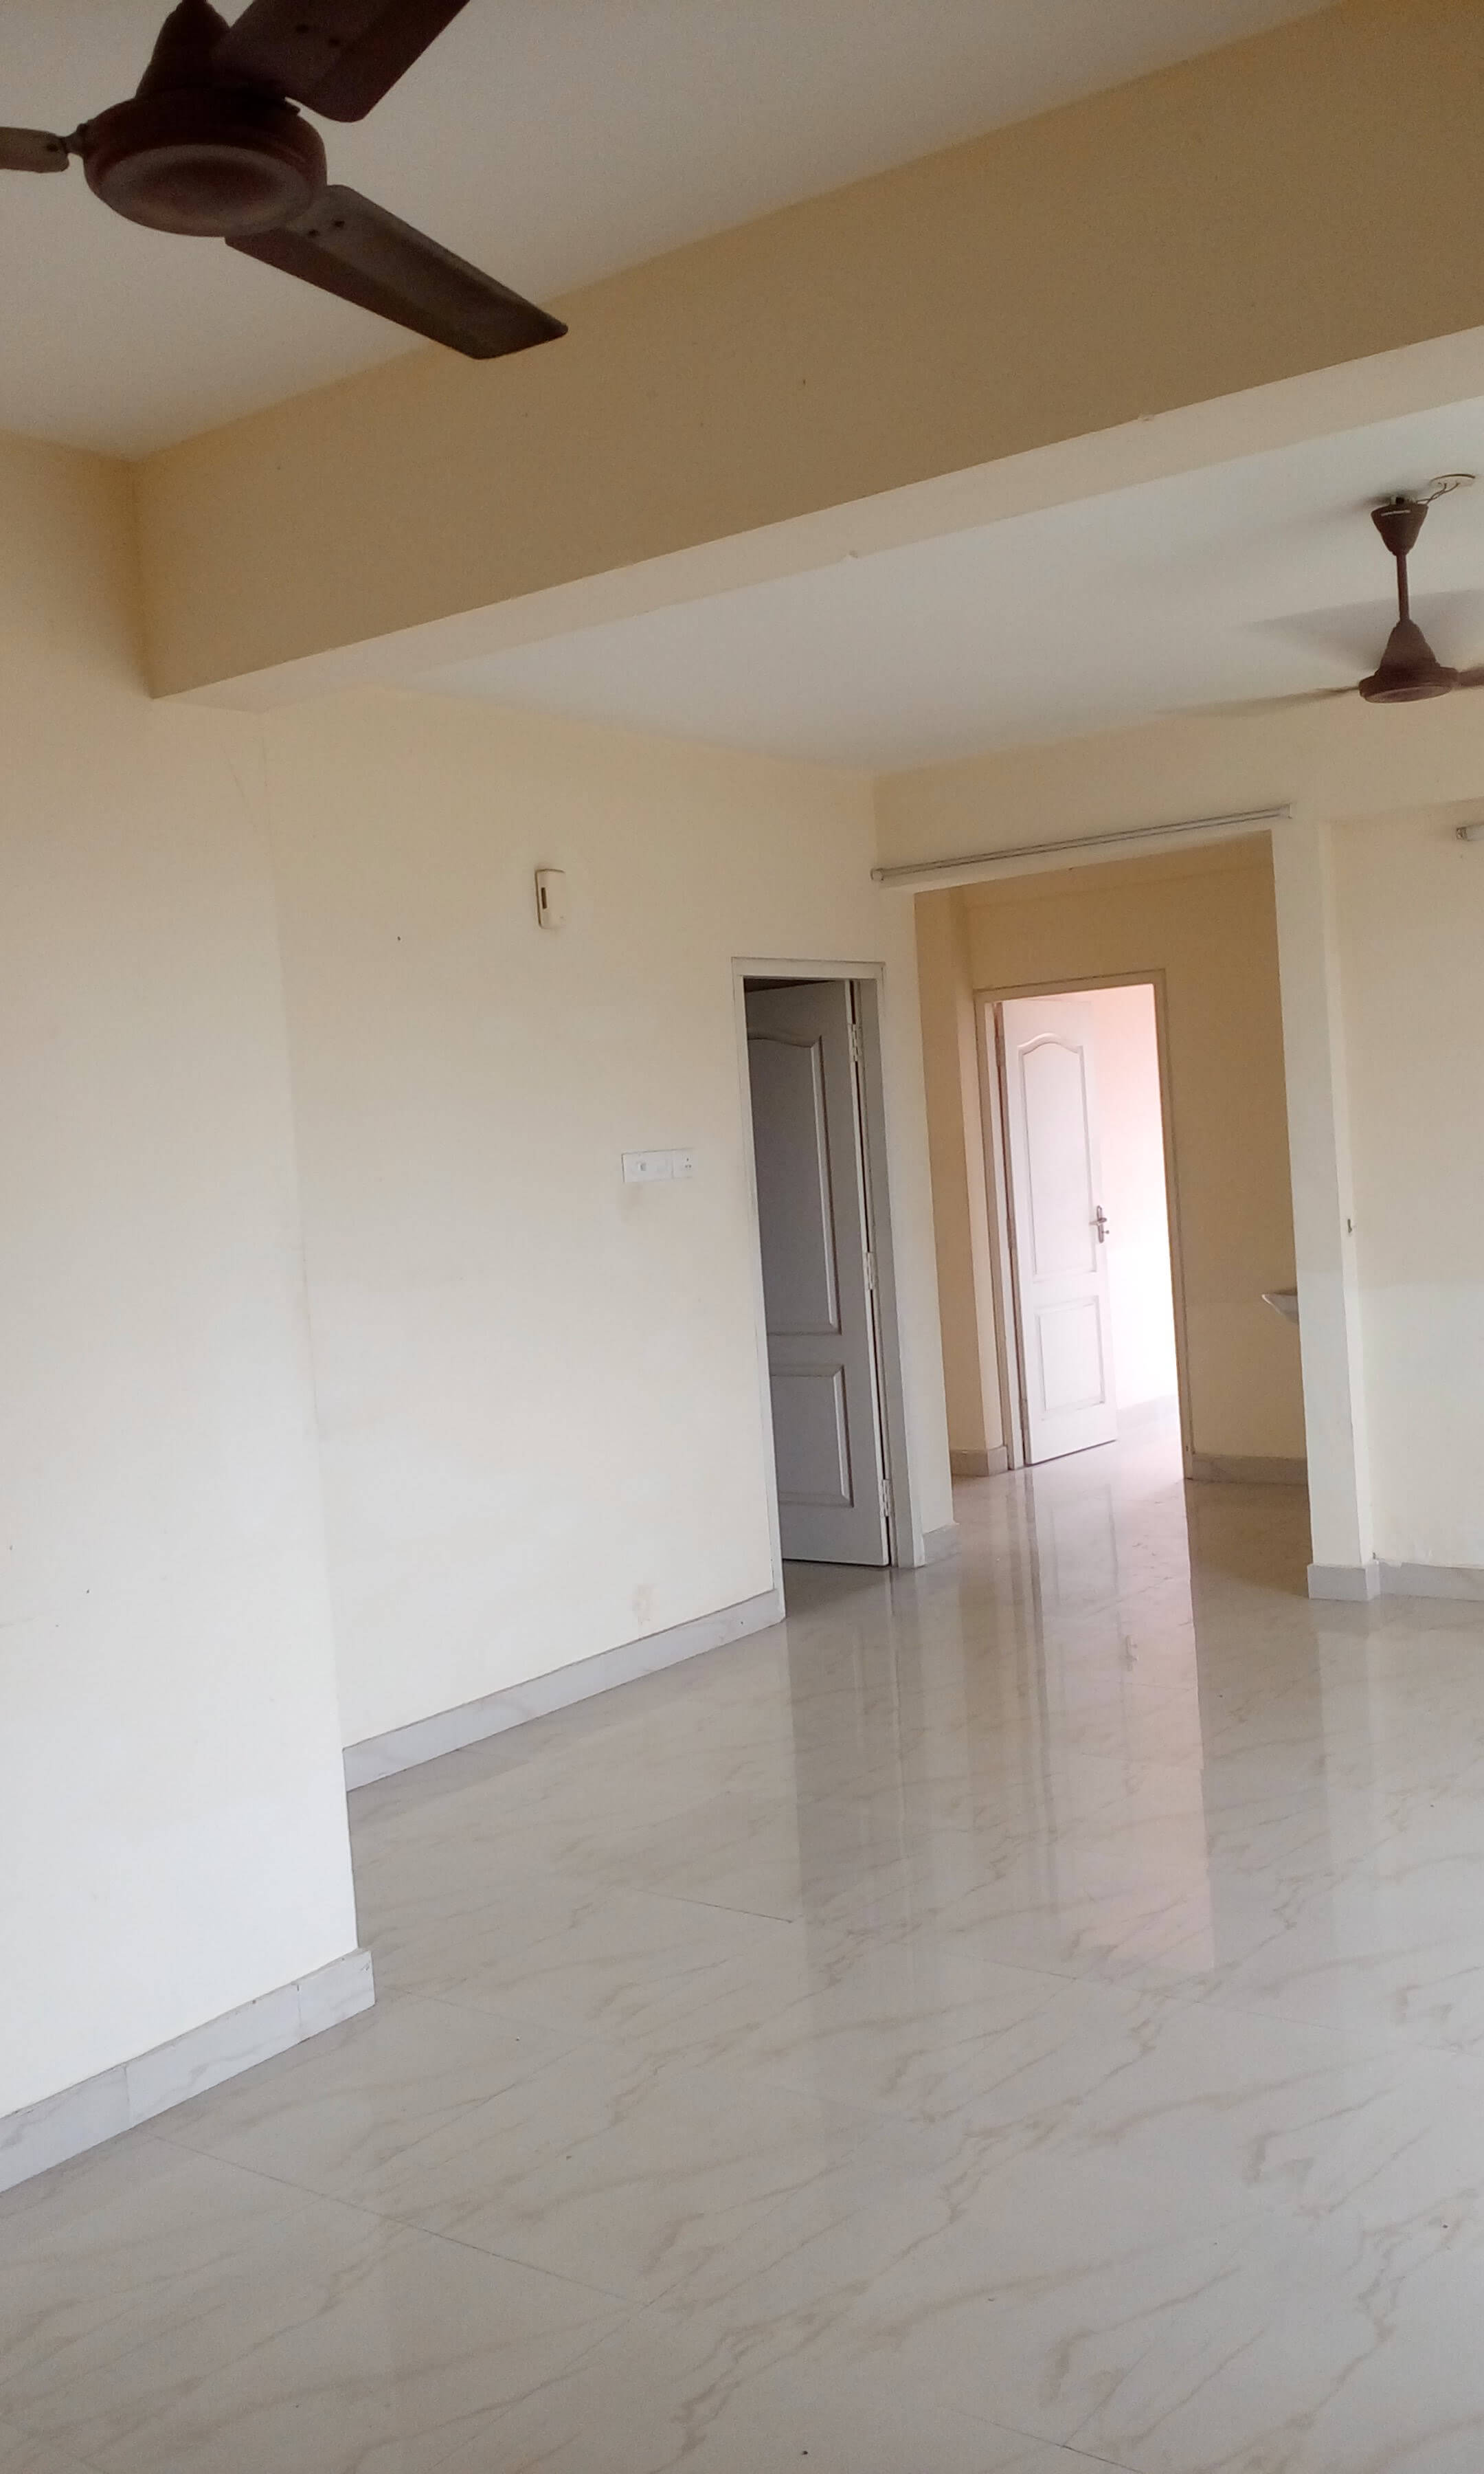 3BHK Flat with lifts Central Water Treatment and purifier installed for rent at Kakanad ,Kochi